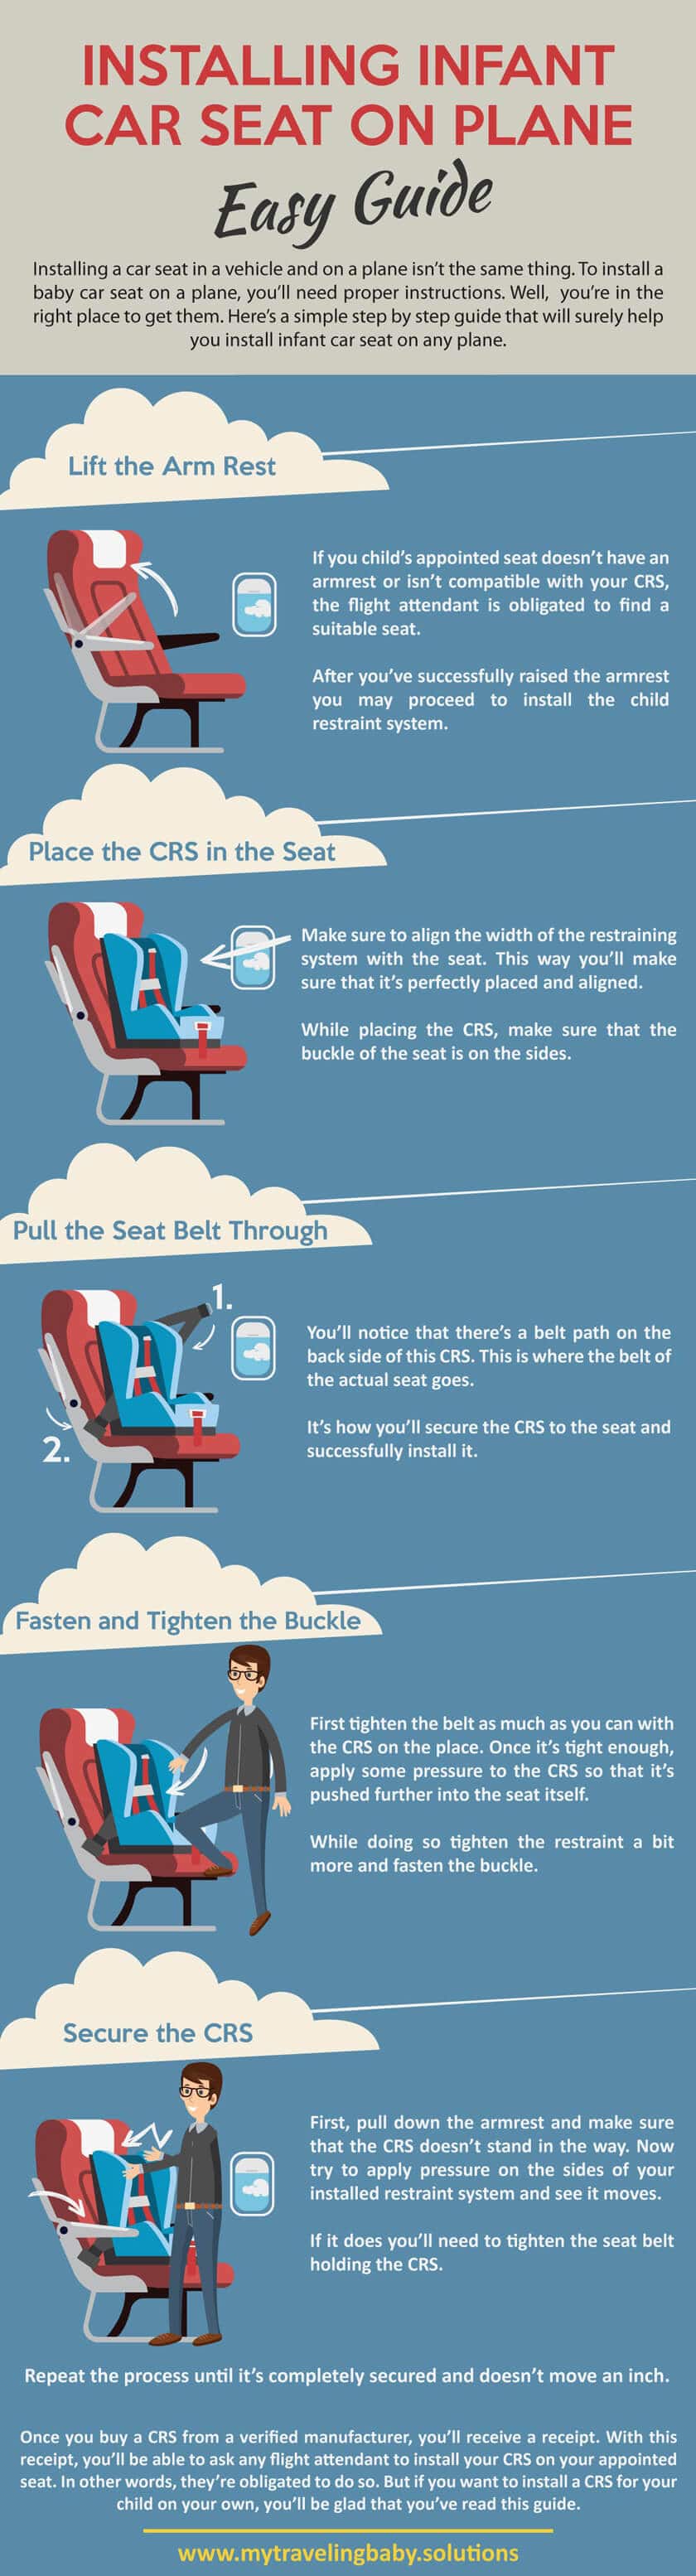 Installing Infant Car Seat on Plane infographic